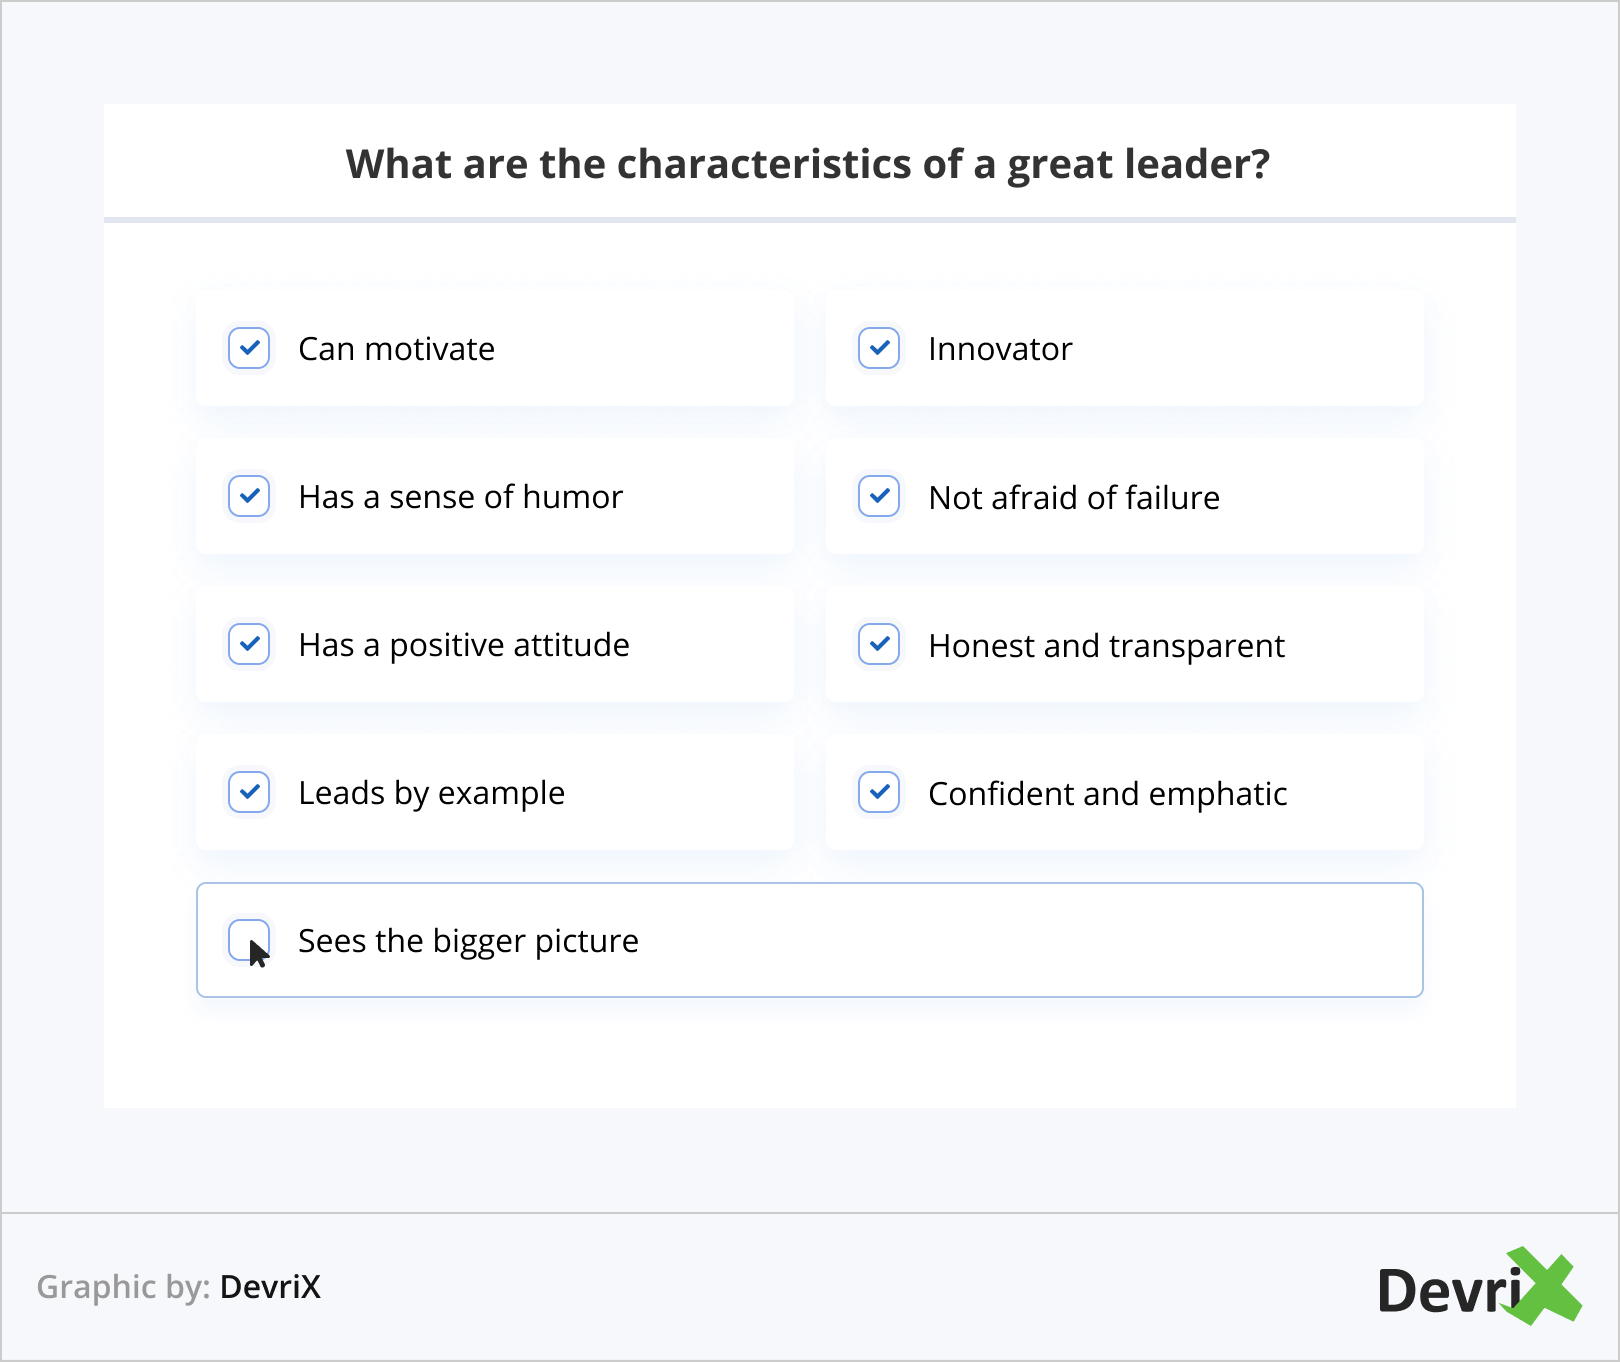 What are the characteristics of a great leader